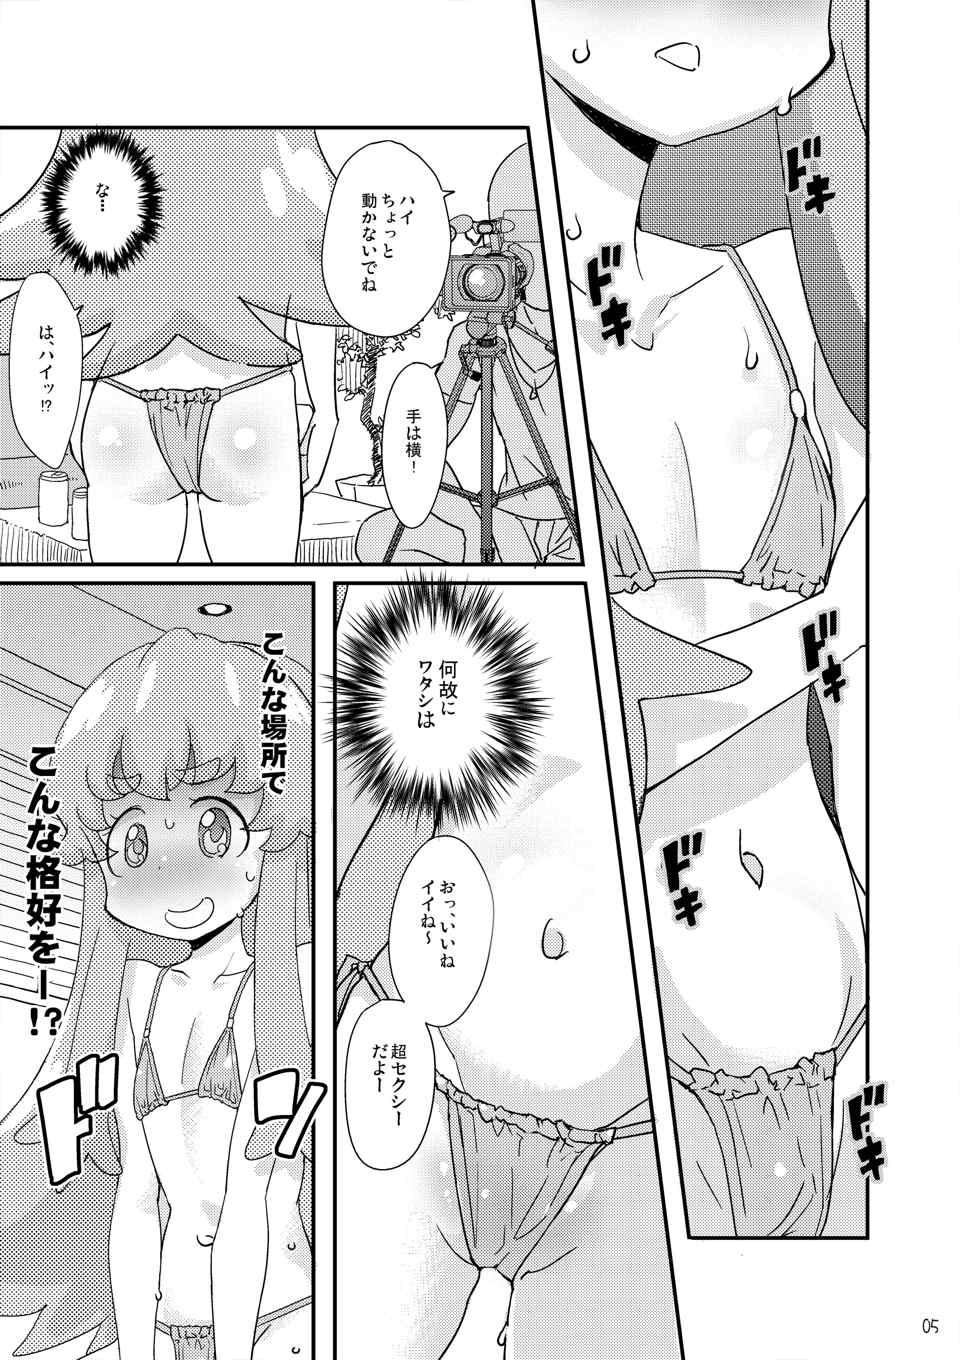 Roleplay HachaMecha Princess HiME-chan - Happinesscharge precure Oldvsyoung - Page 5